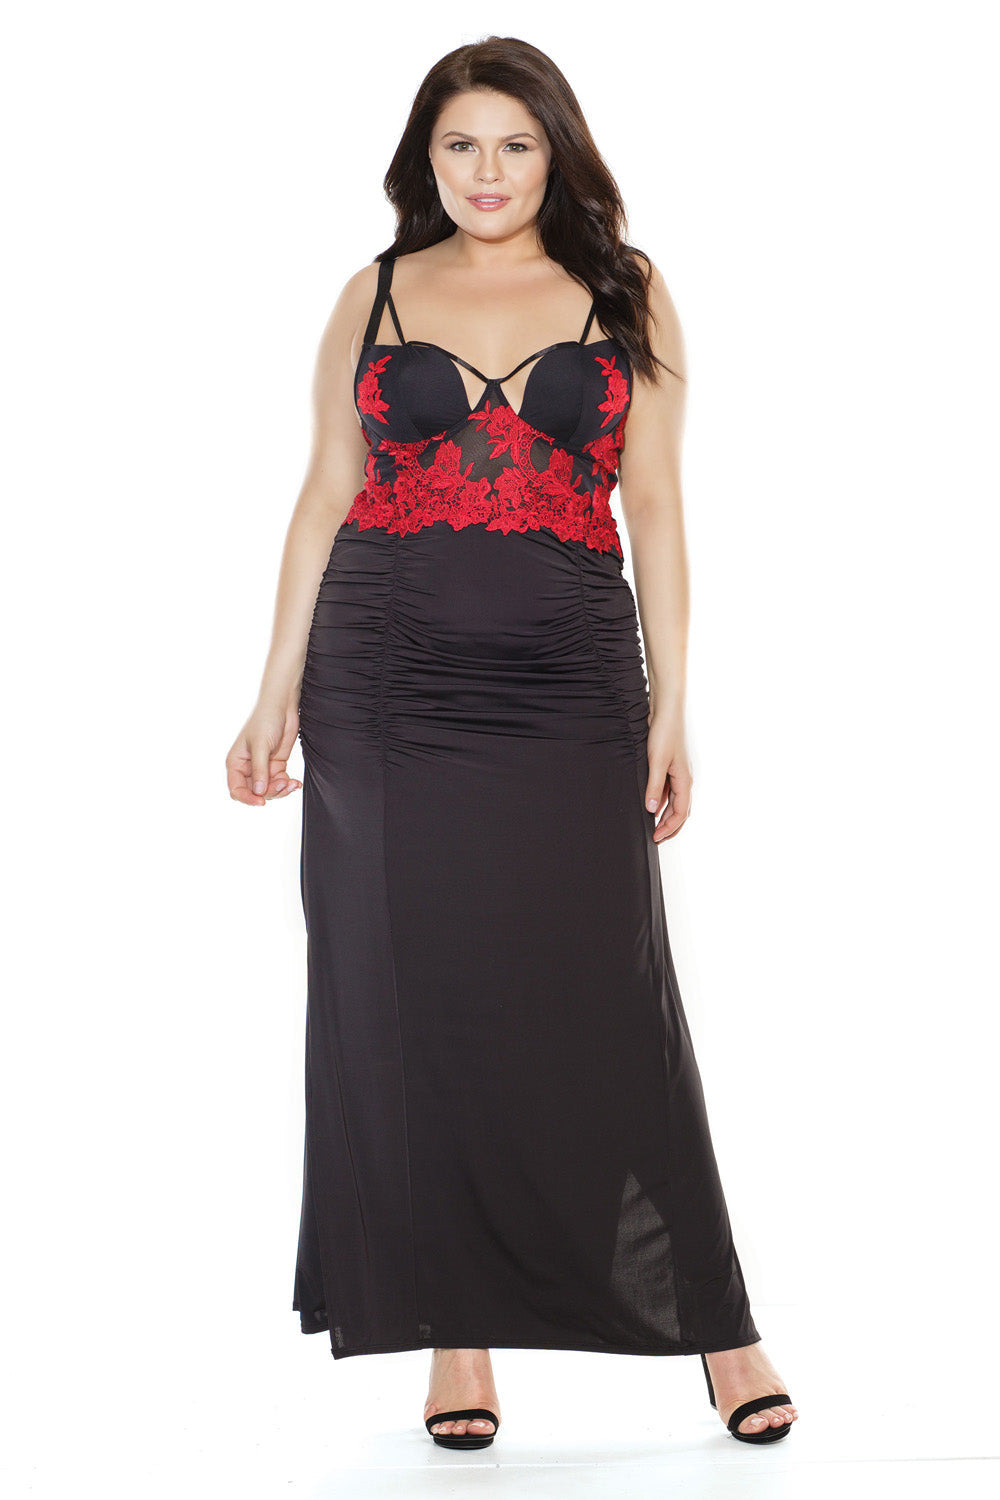 Microfibre Gown with Side Slit 3870 - Black/Red